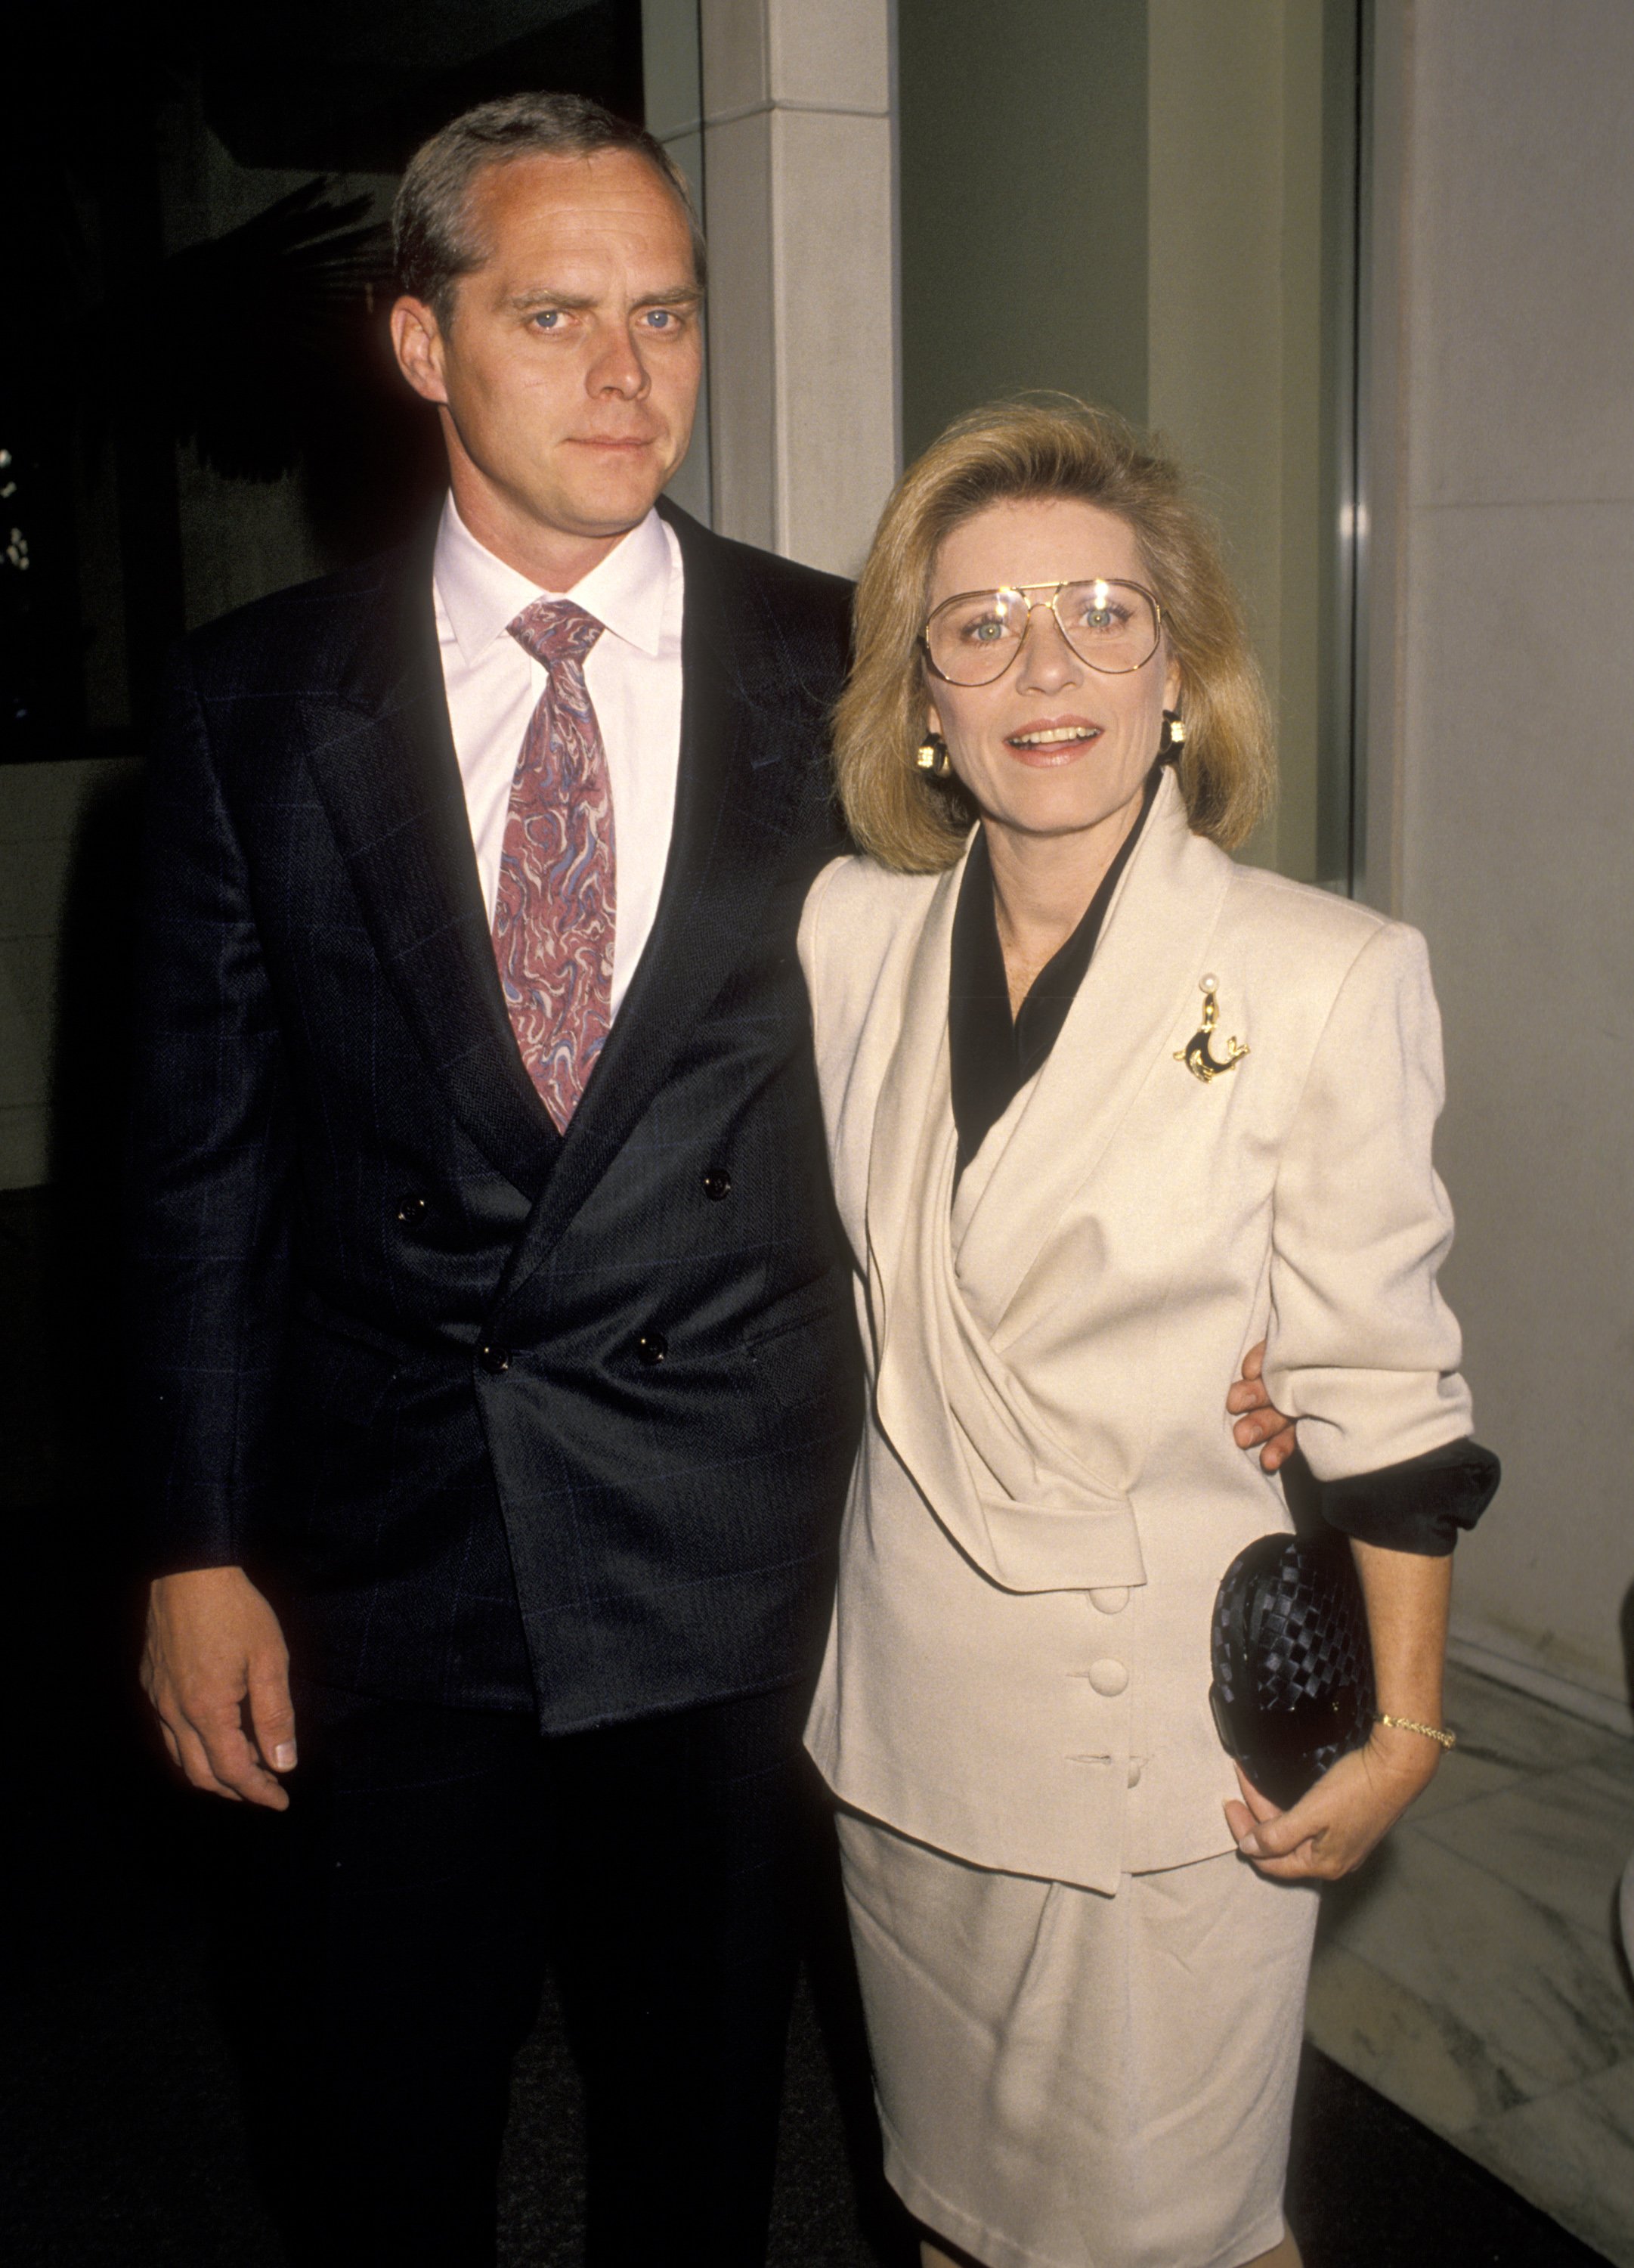 Patty Duke and Michael Pearce during ABC Annual Fall Affiliates Dinner - June 14, 1990 at Century Plaza Hotel in Century City, California, United States | Source: Getty Images